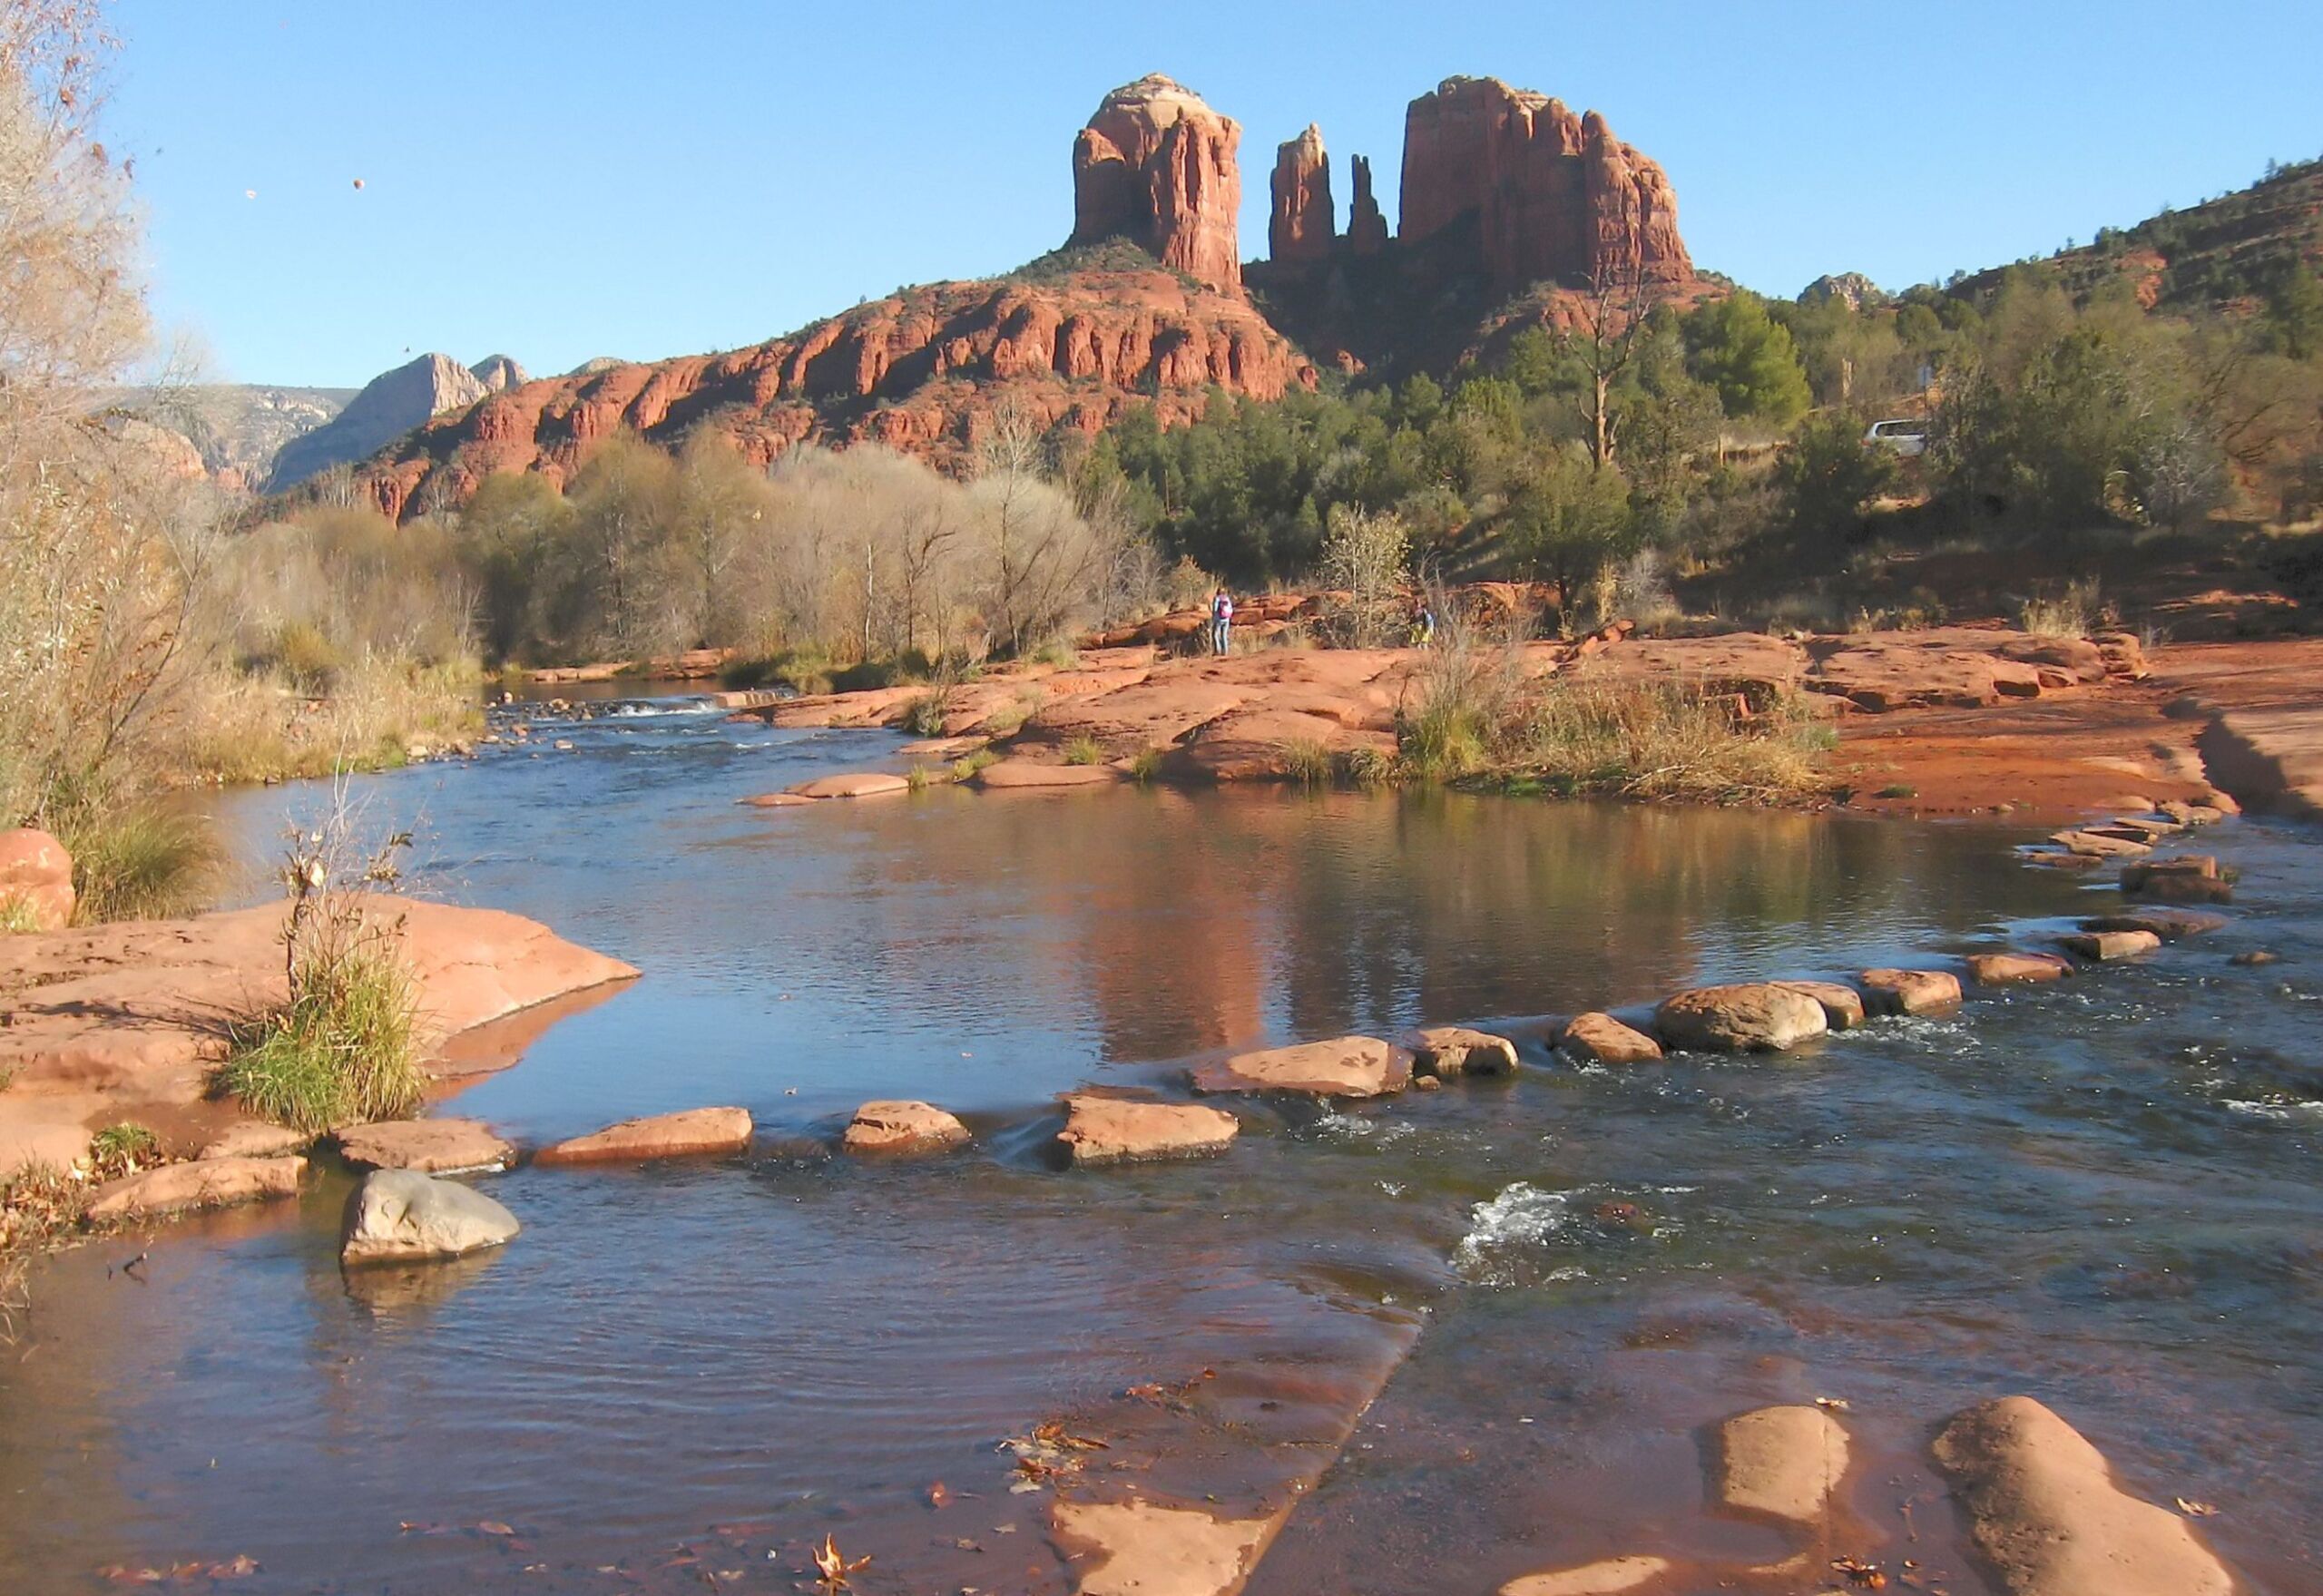 Can you go swimming in Sedona?